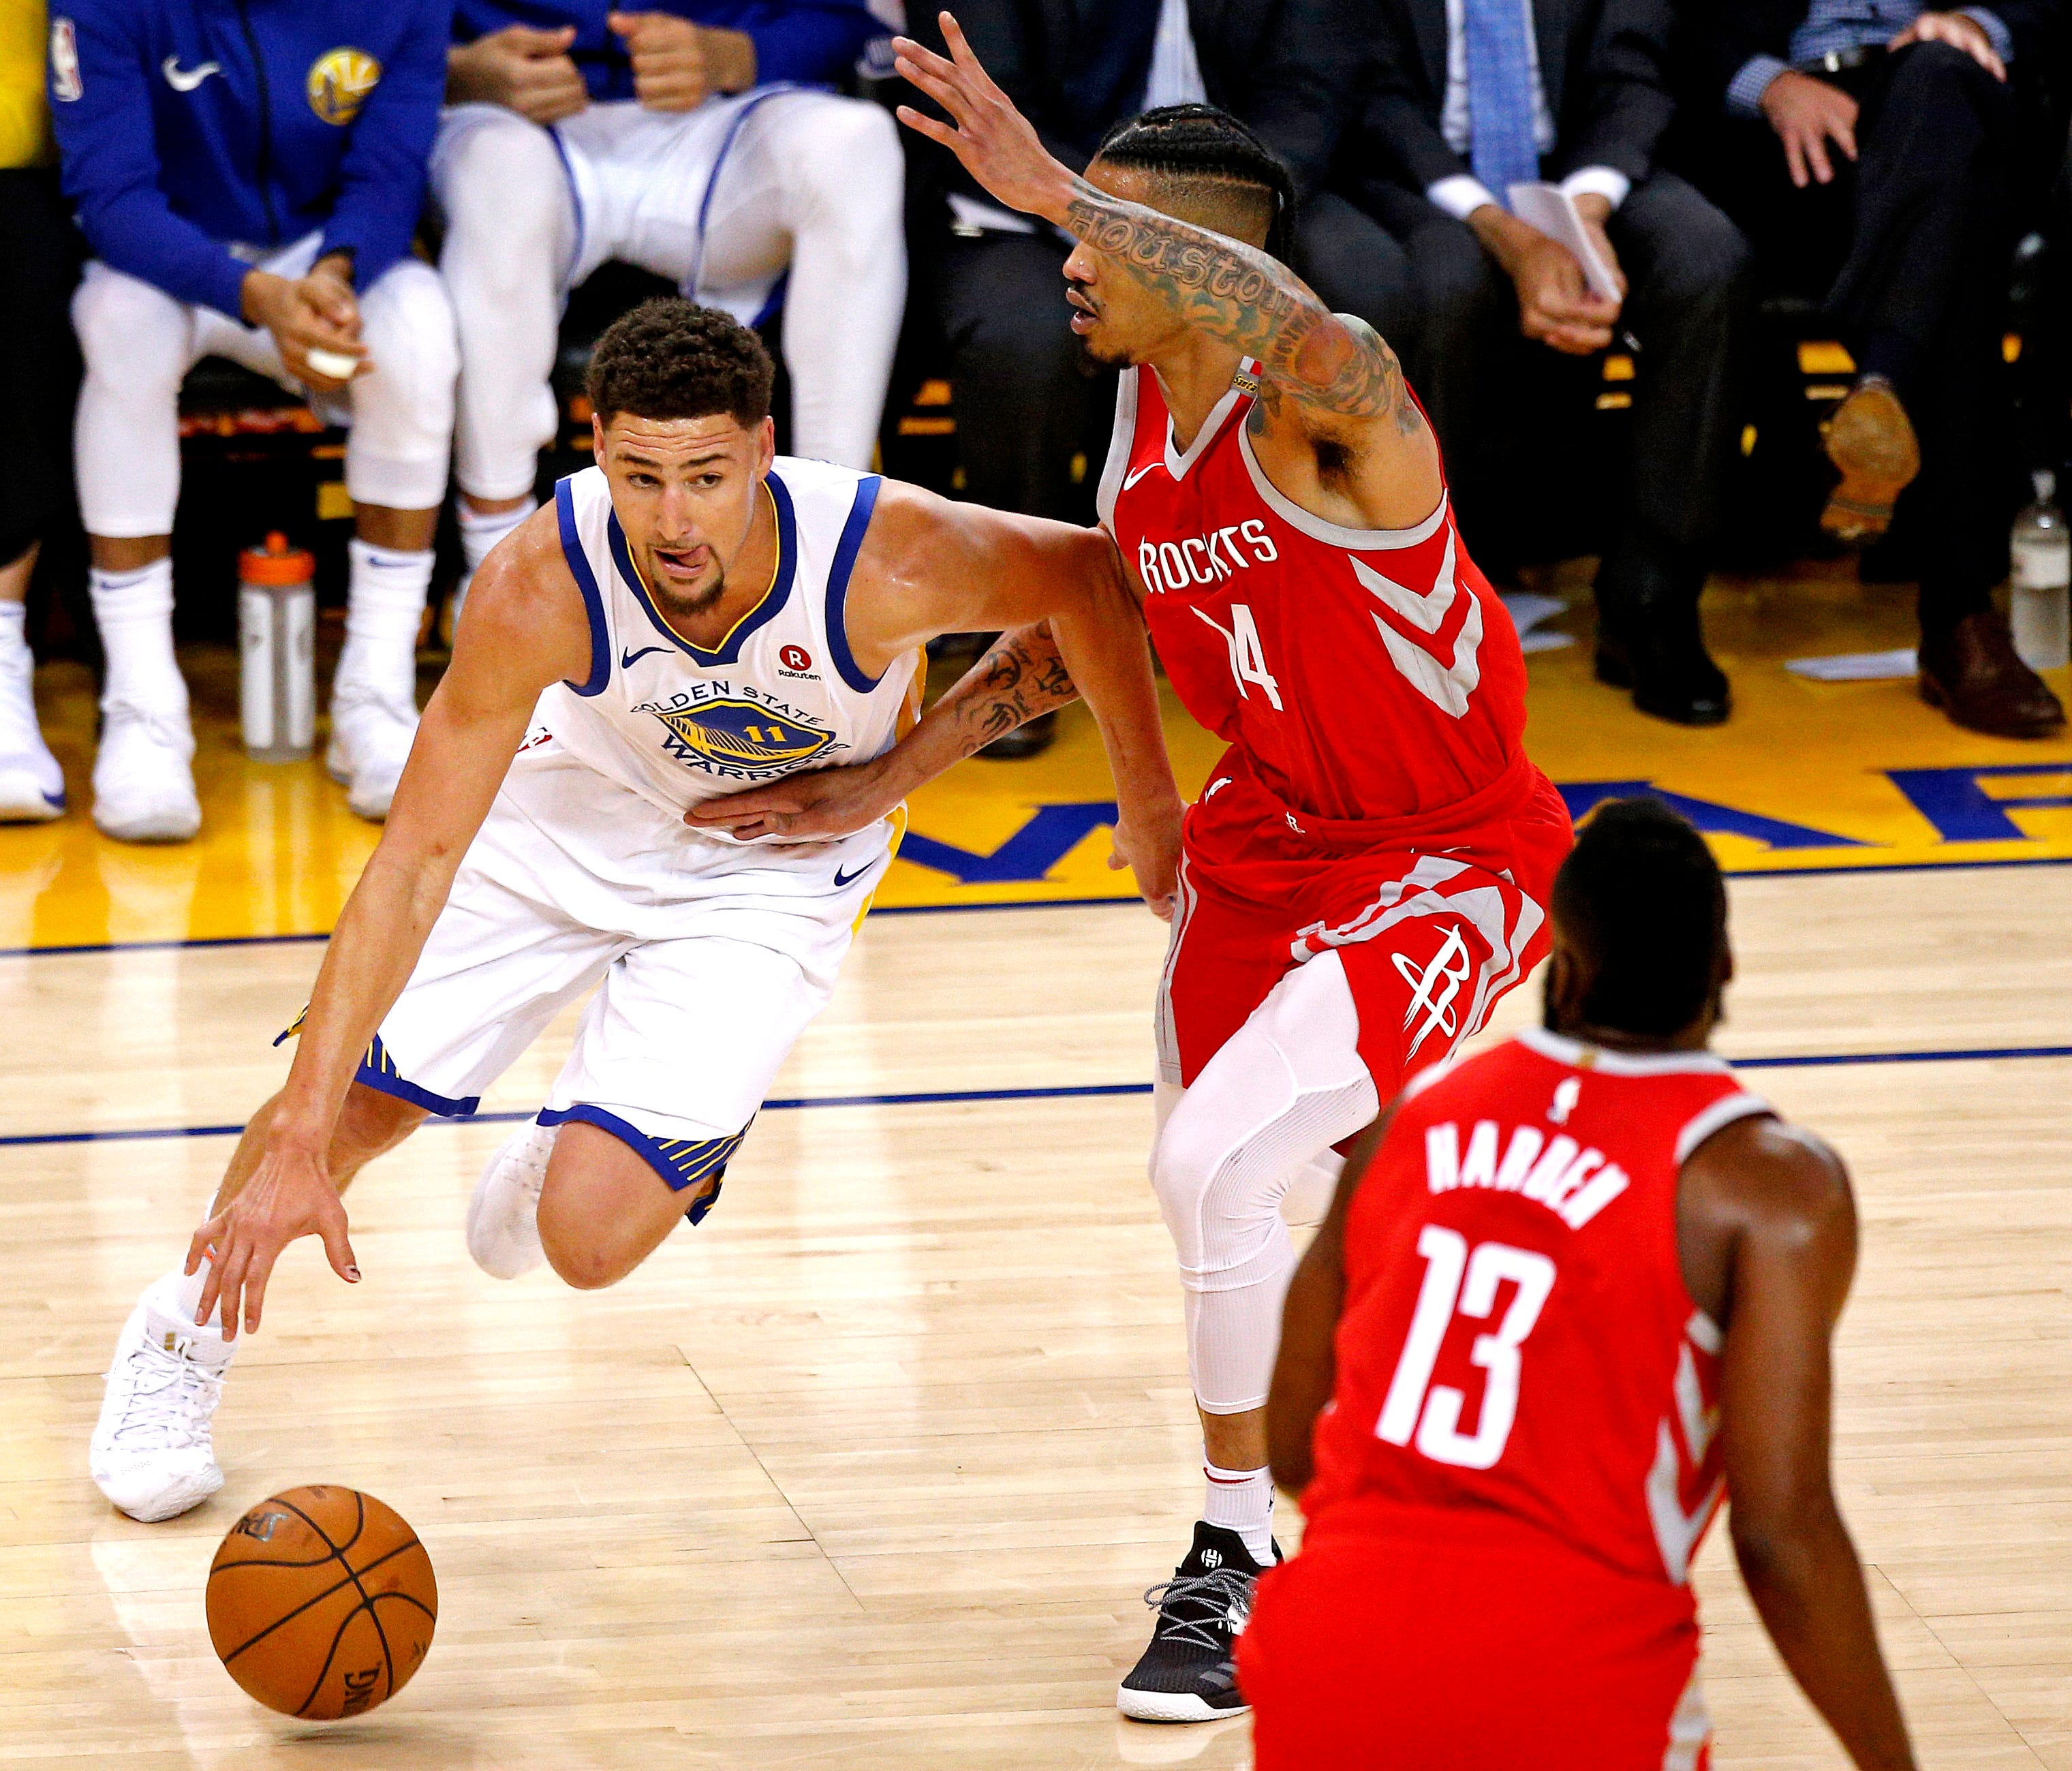 Golden State Warriors guard Klay Thompson (11) drives to the basket against Houston Rockets guard Gerald Green (14) during the first quarter in game six of the Western conference finals of the 2018 NBA Playoffs at Oracle Arena.